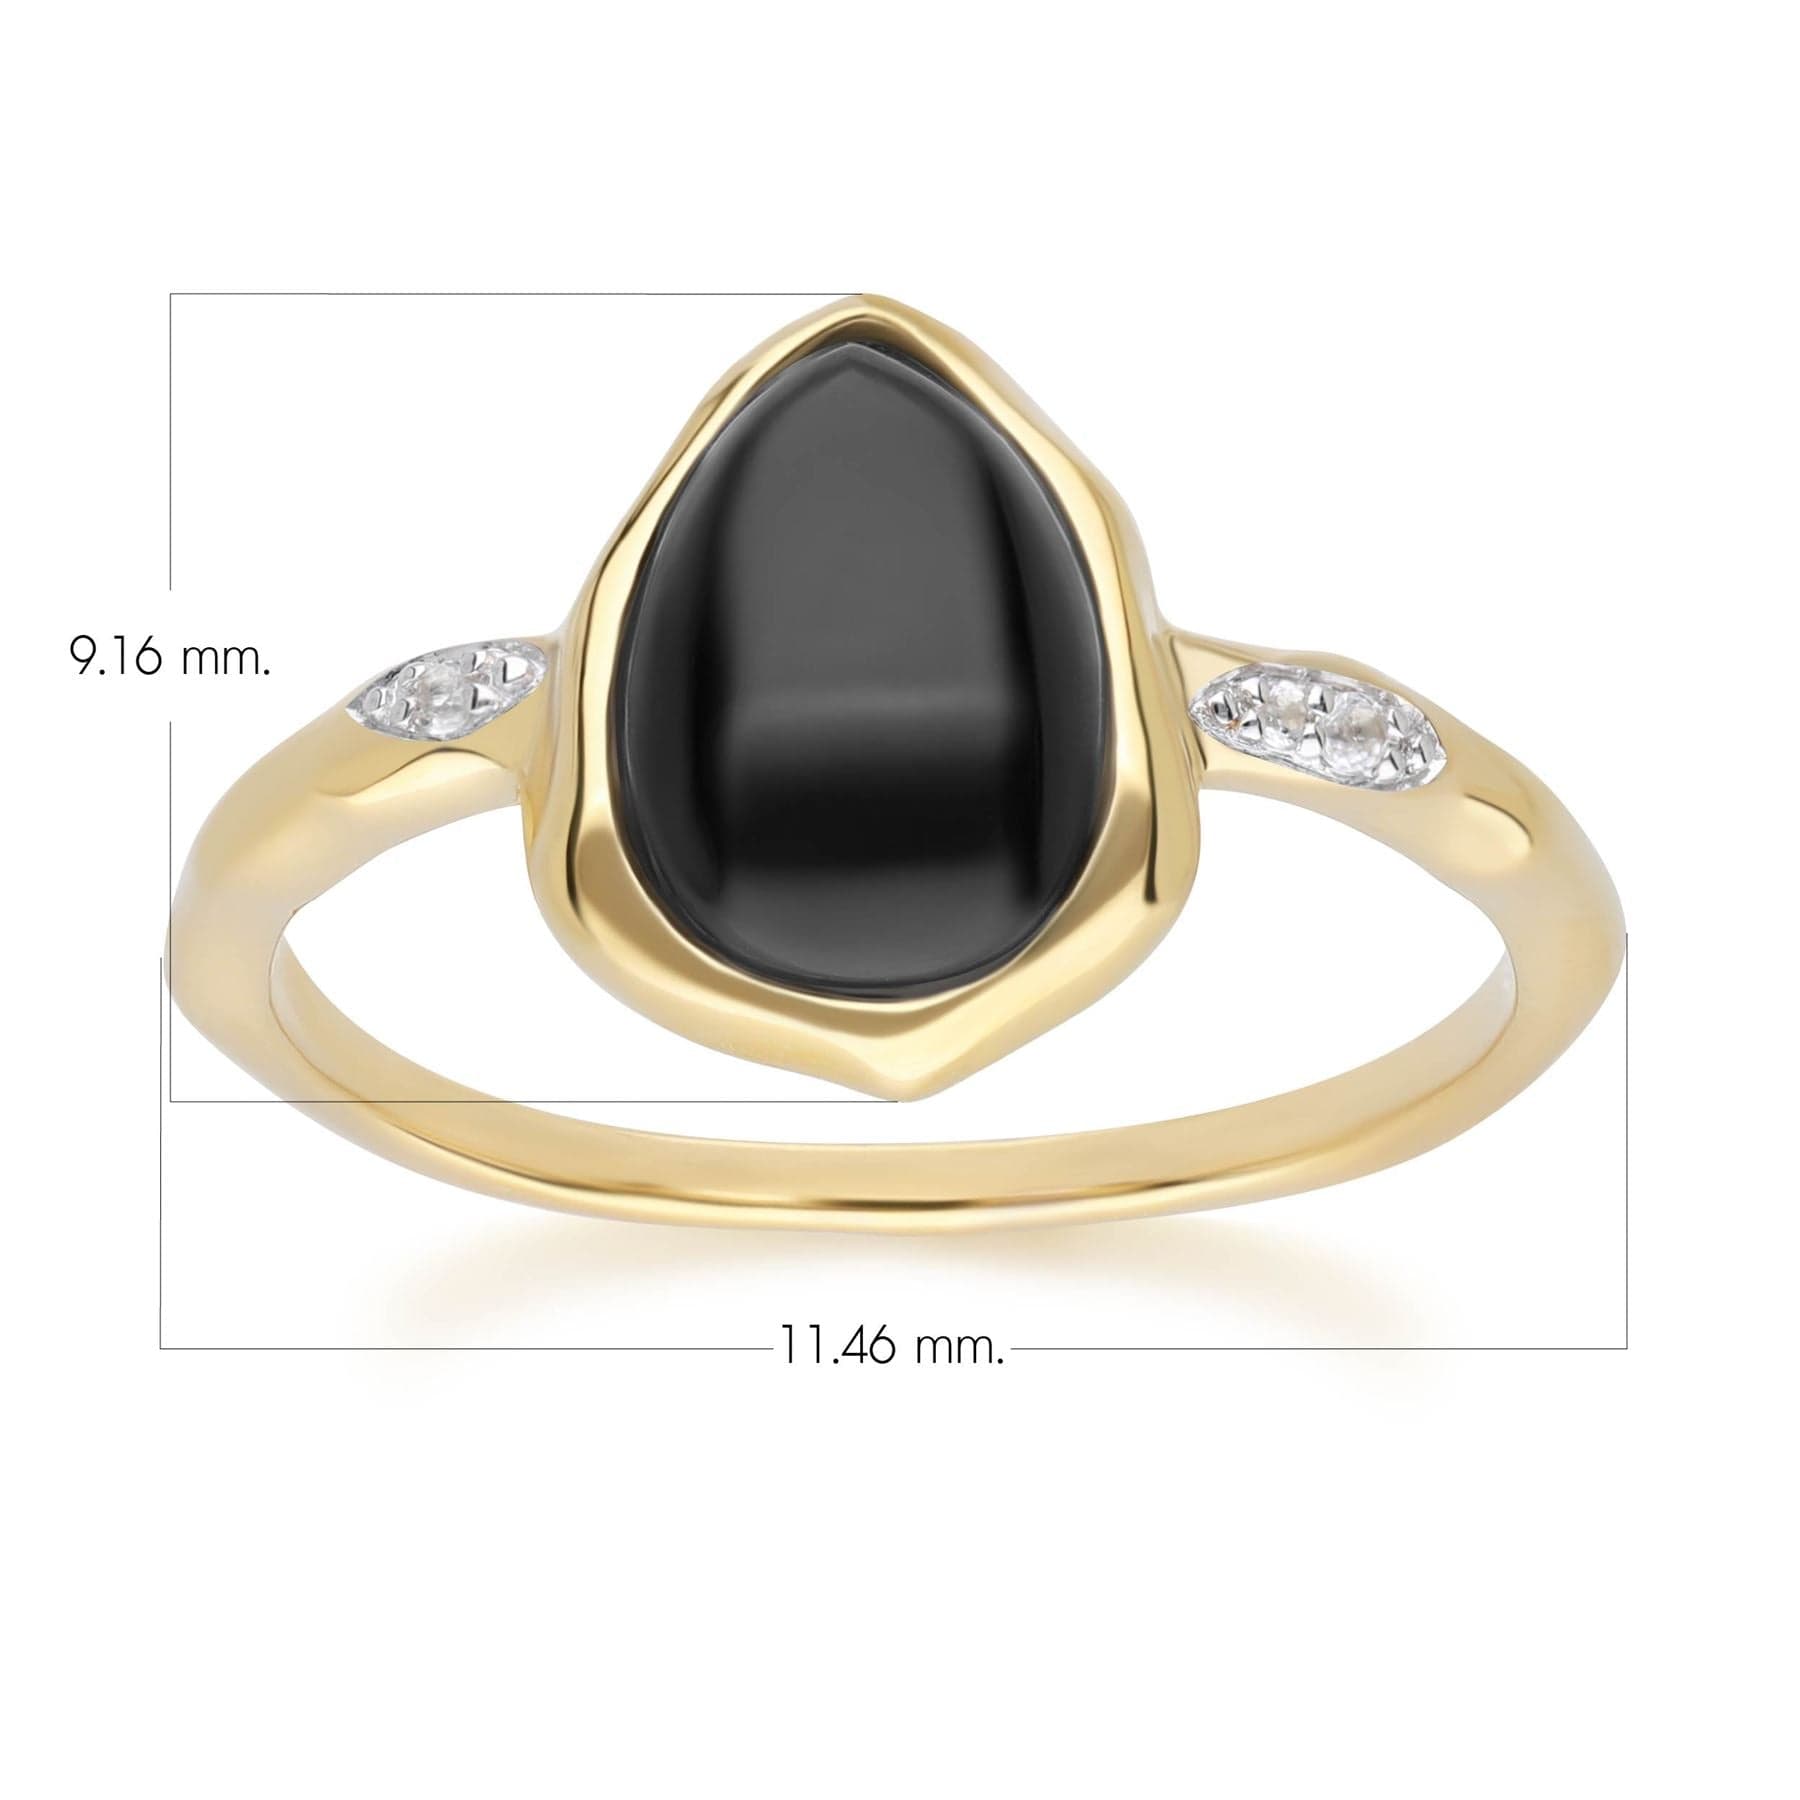 253R710203925 Irregular Black Onyx & Topaz Ring In 18ct Gold Plated SterlIng Silver Dimensions